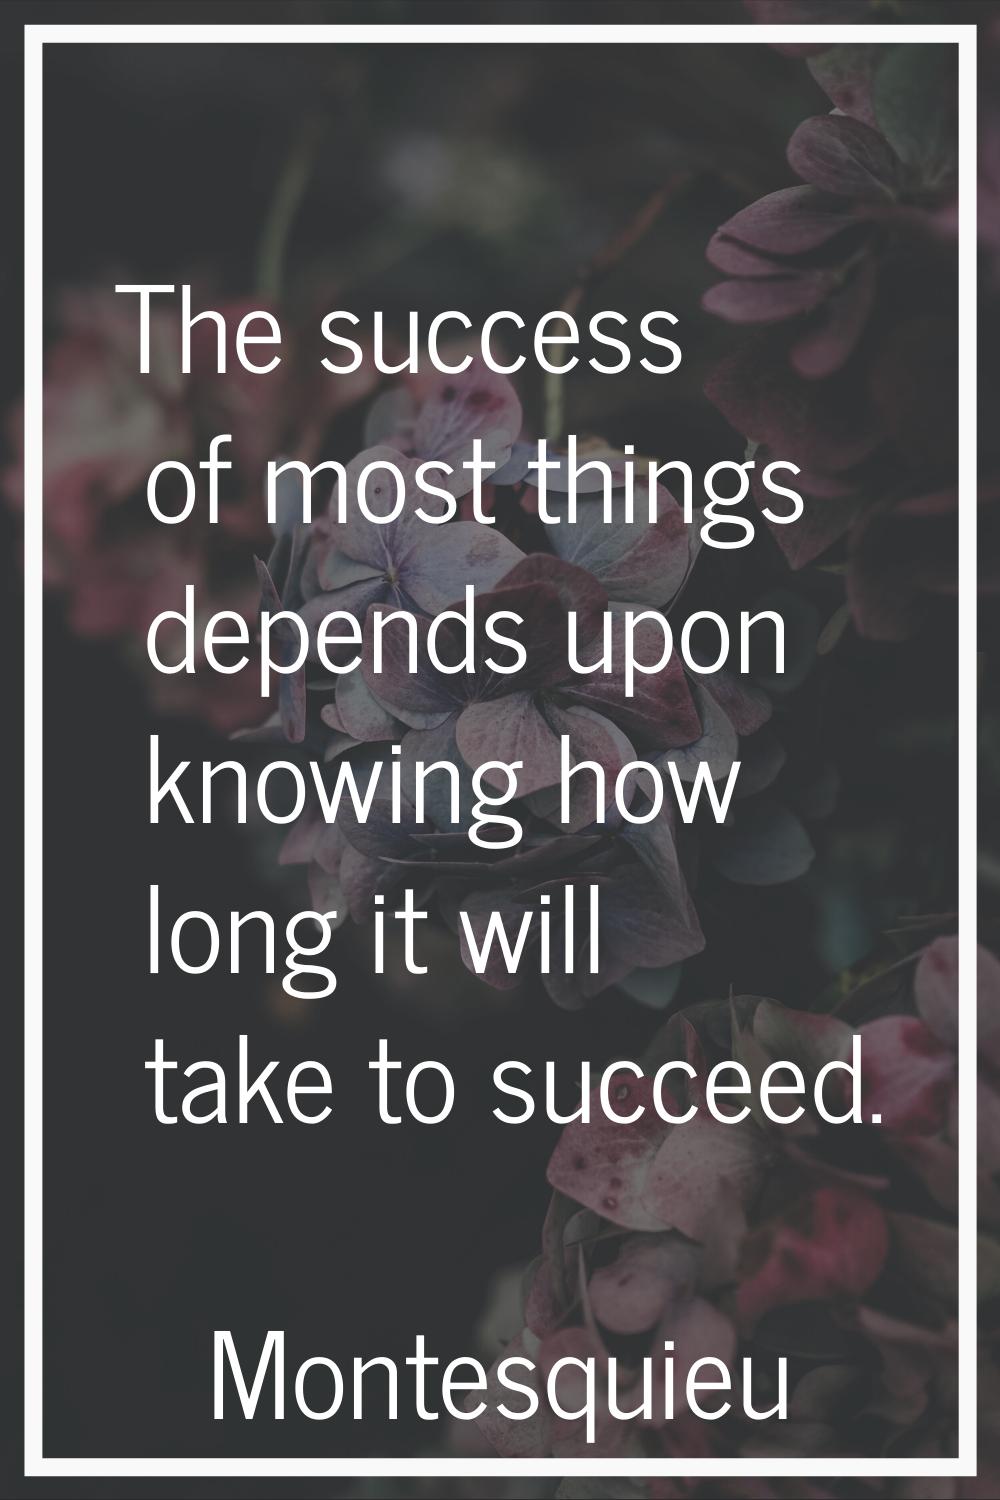 The success of most things depends upon knowing how long it will take to succeed.